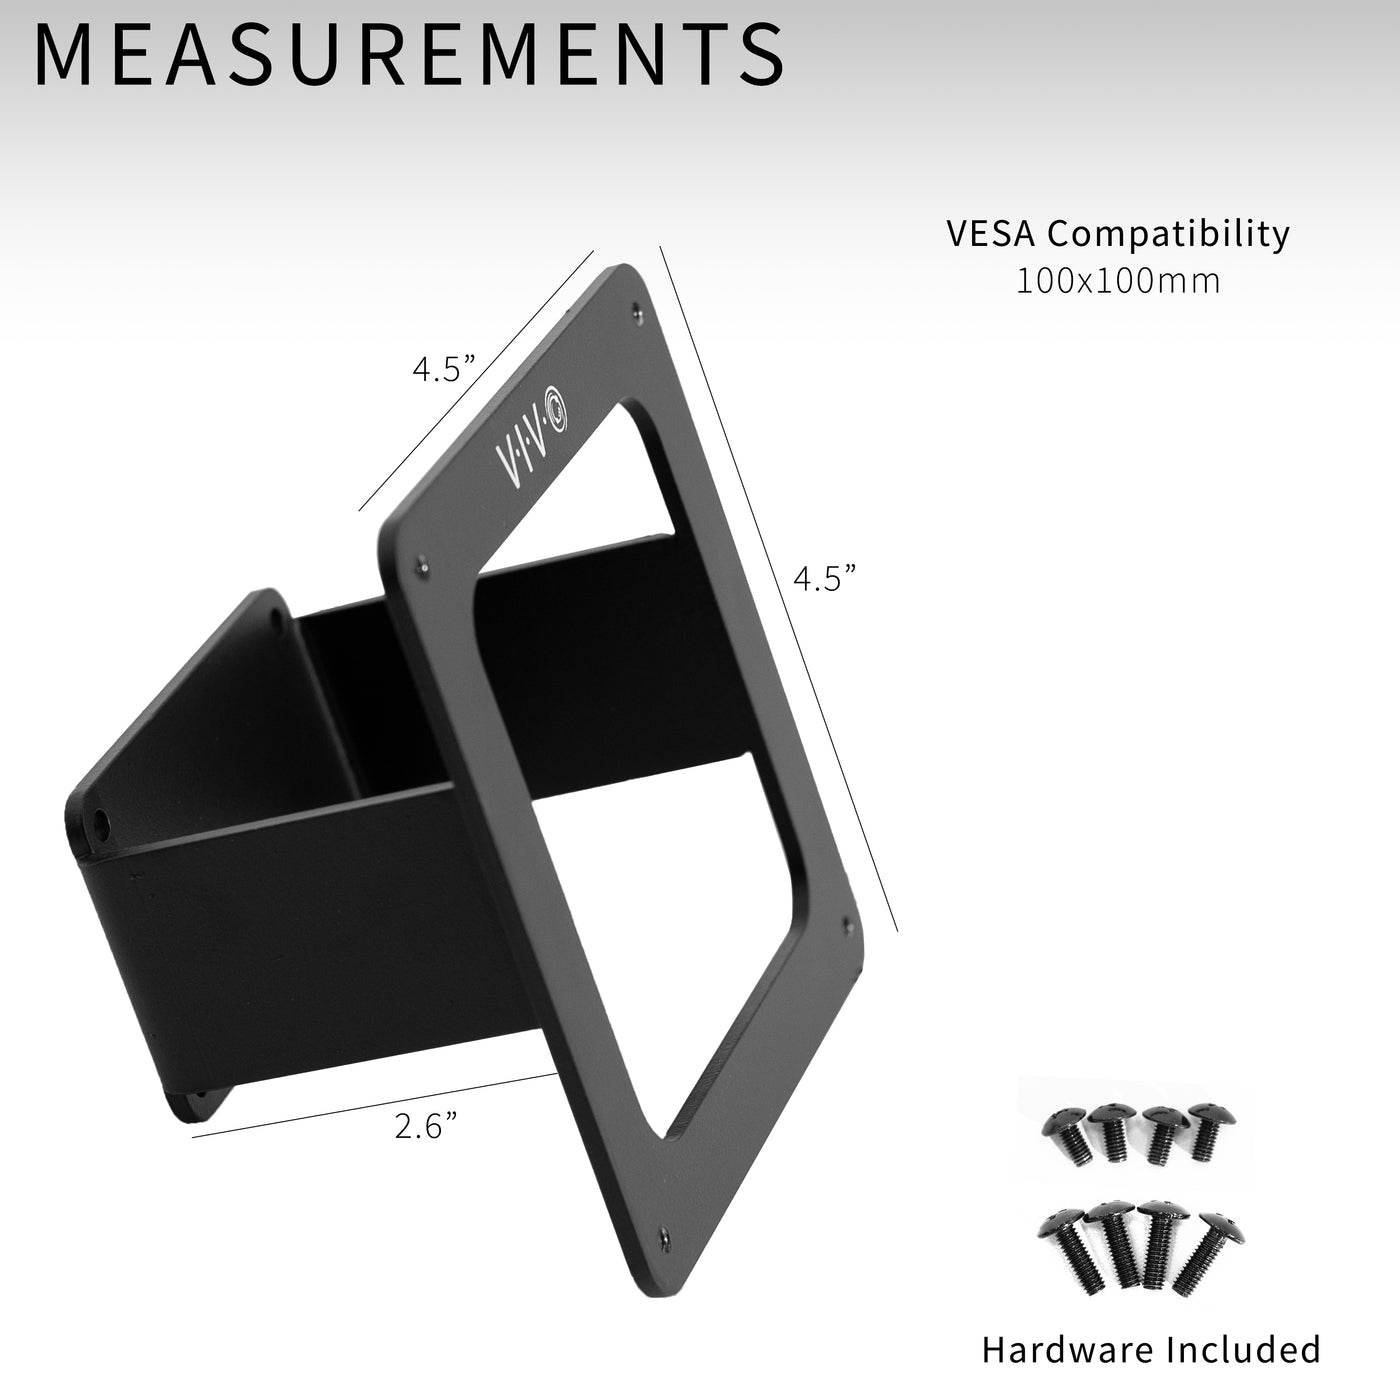 VESA Adapter Designed for Compatible Samsung Neo G9, G65B, G70A, G75T, G85NB, CRG9, CHG9, CHG90, and Odyssey G9, allowing your non VESA compatible monitor to be mounted to a stand of your choice.